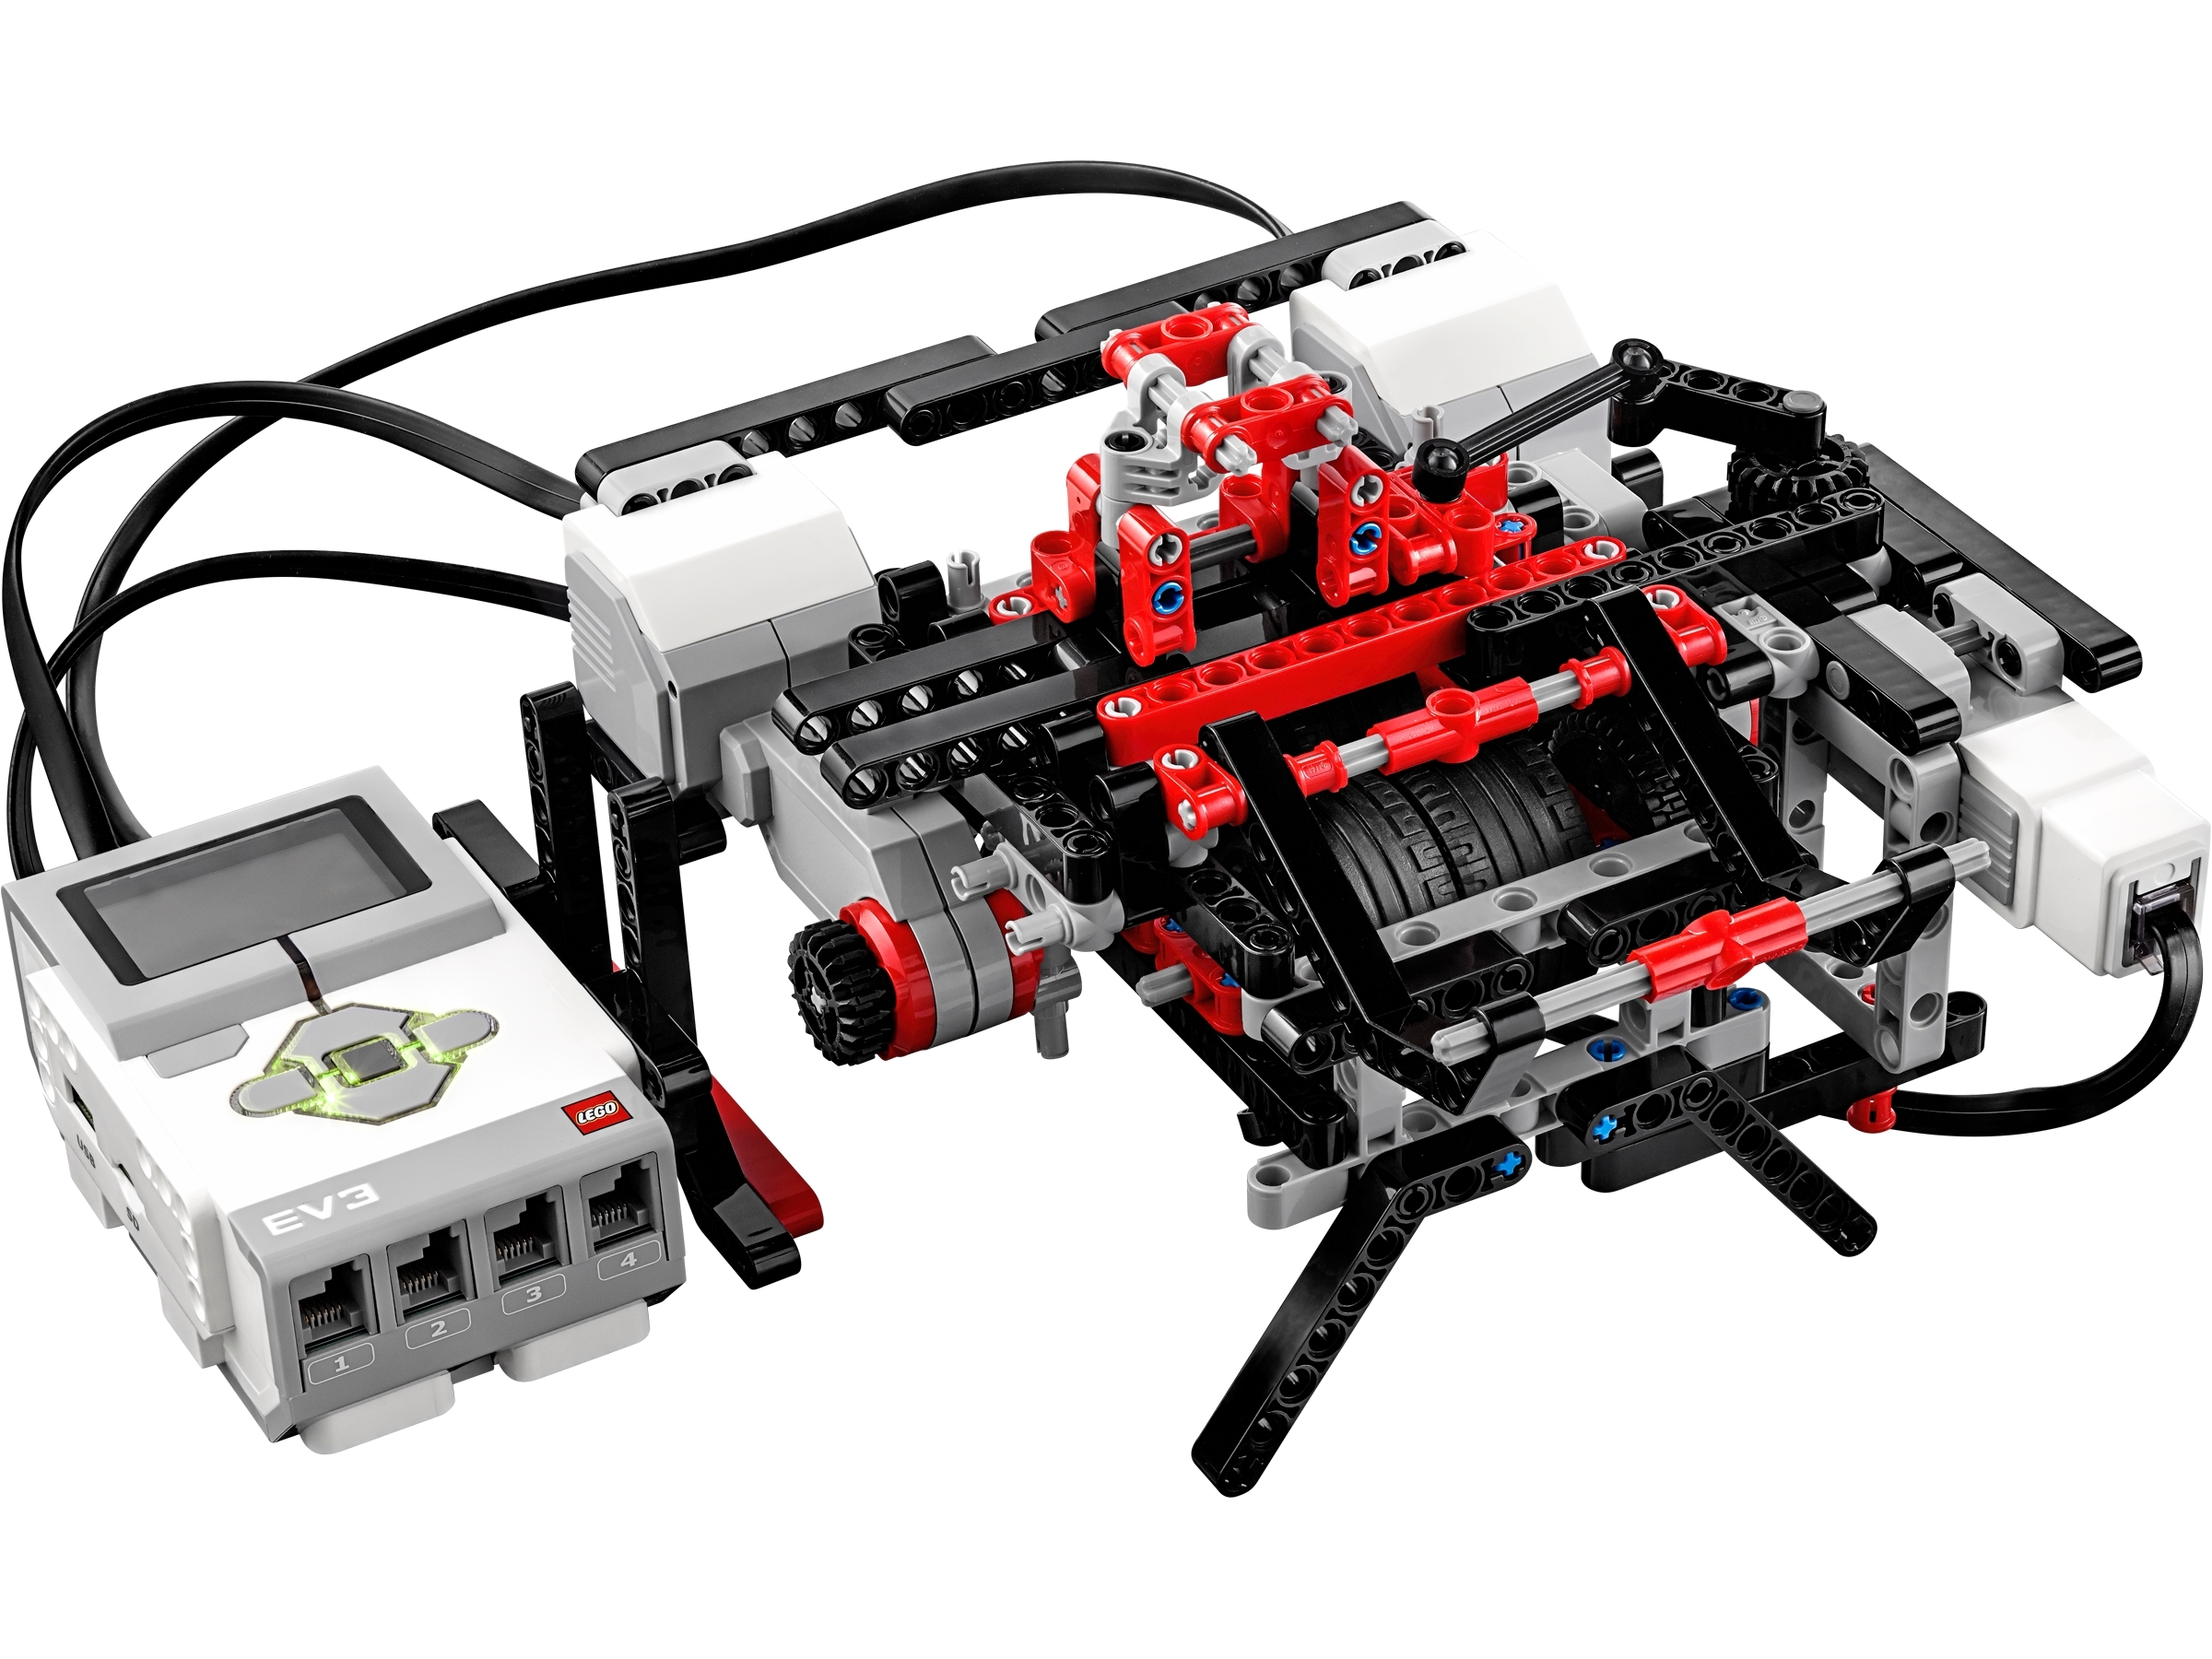 Lego Mindstorms Drawing Robot